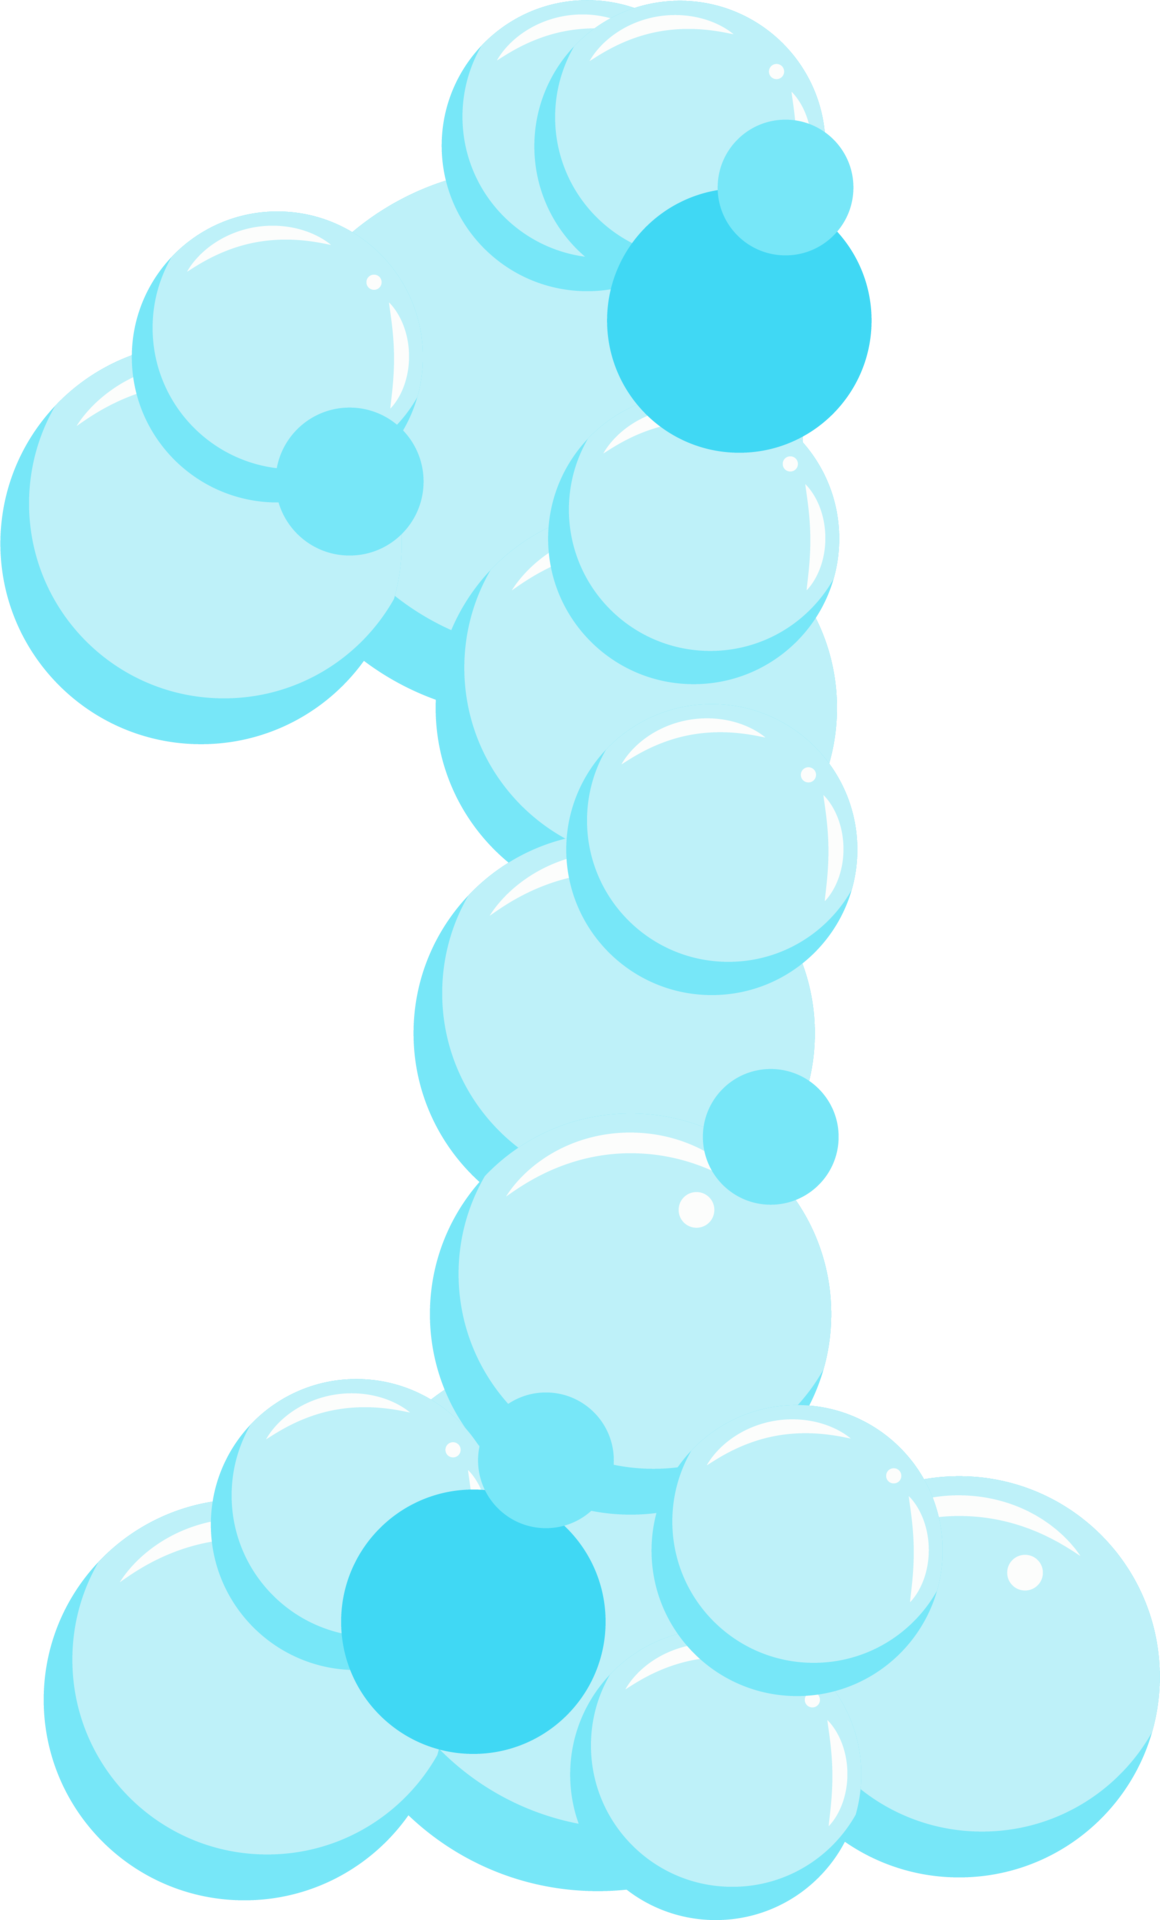 File:Bubblesort1.png - Wikimedia Commons